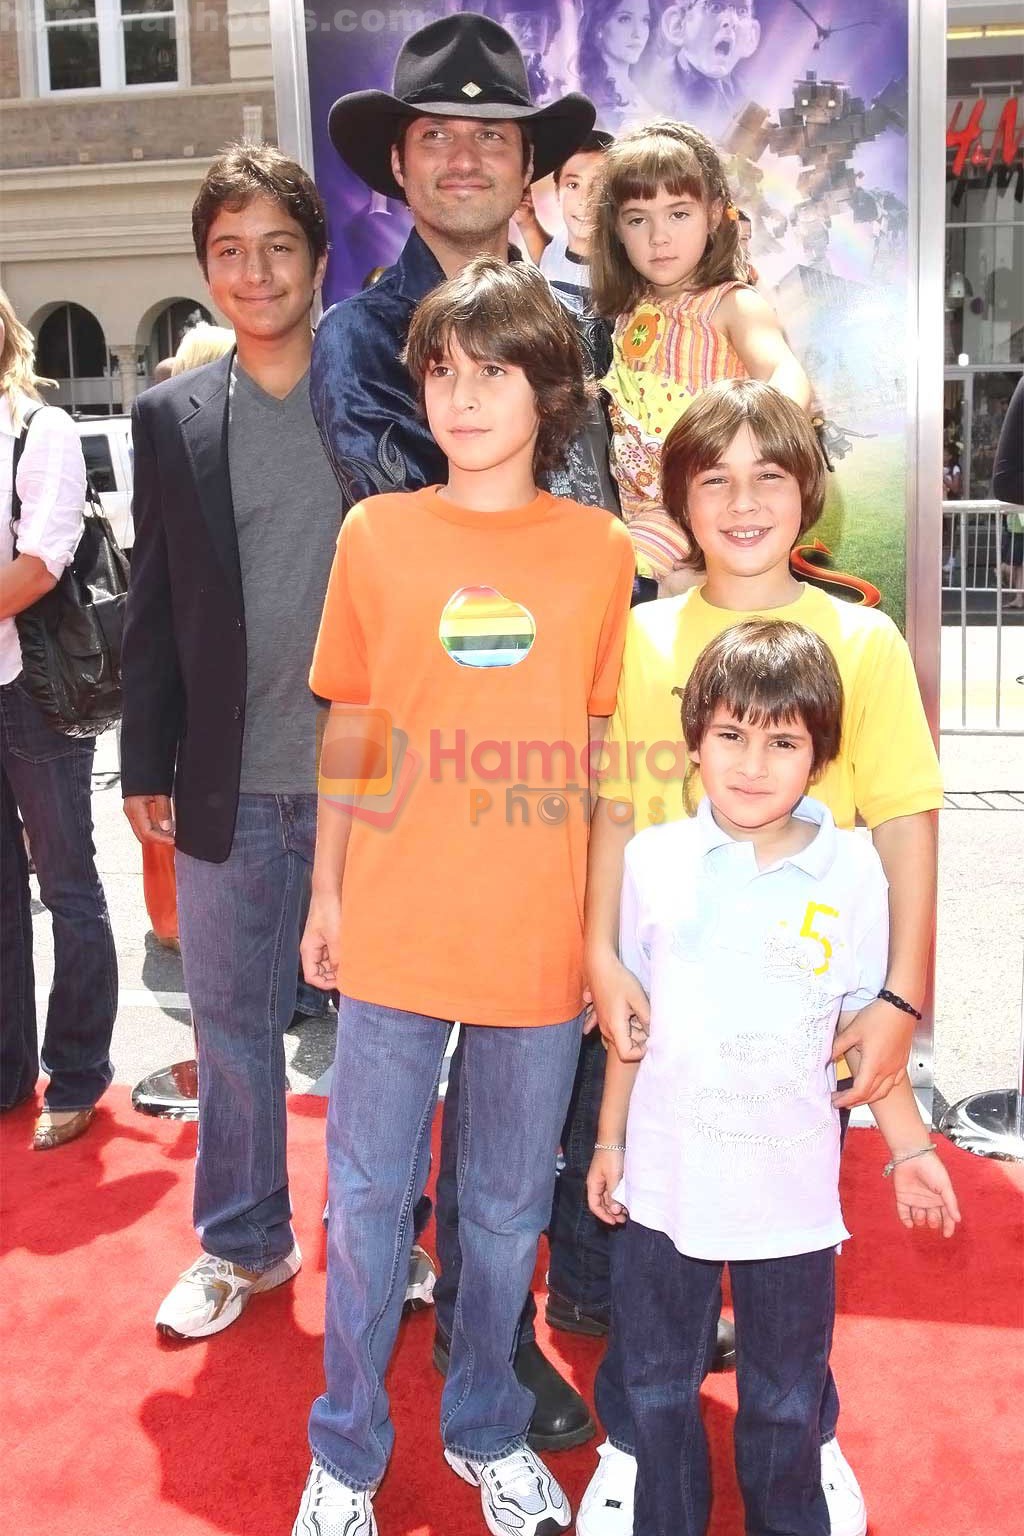 Robert Rodriguez and Family at the Premiere Of SHORTS held at The Grauman's Chinese Theatre in Hollywood, California, USA on Aug 15th 2009 - IANS-WENN